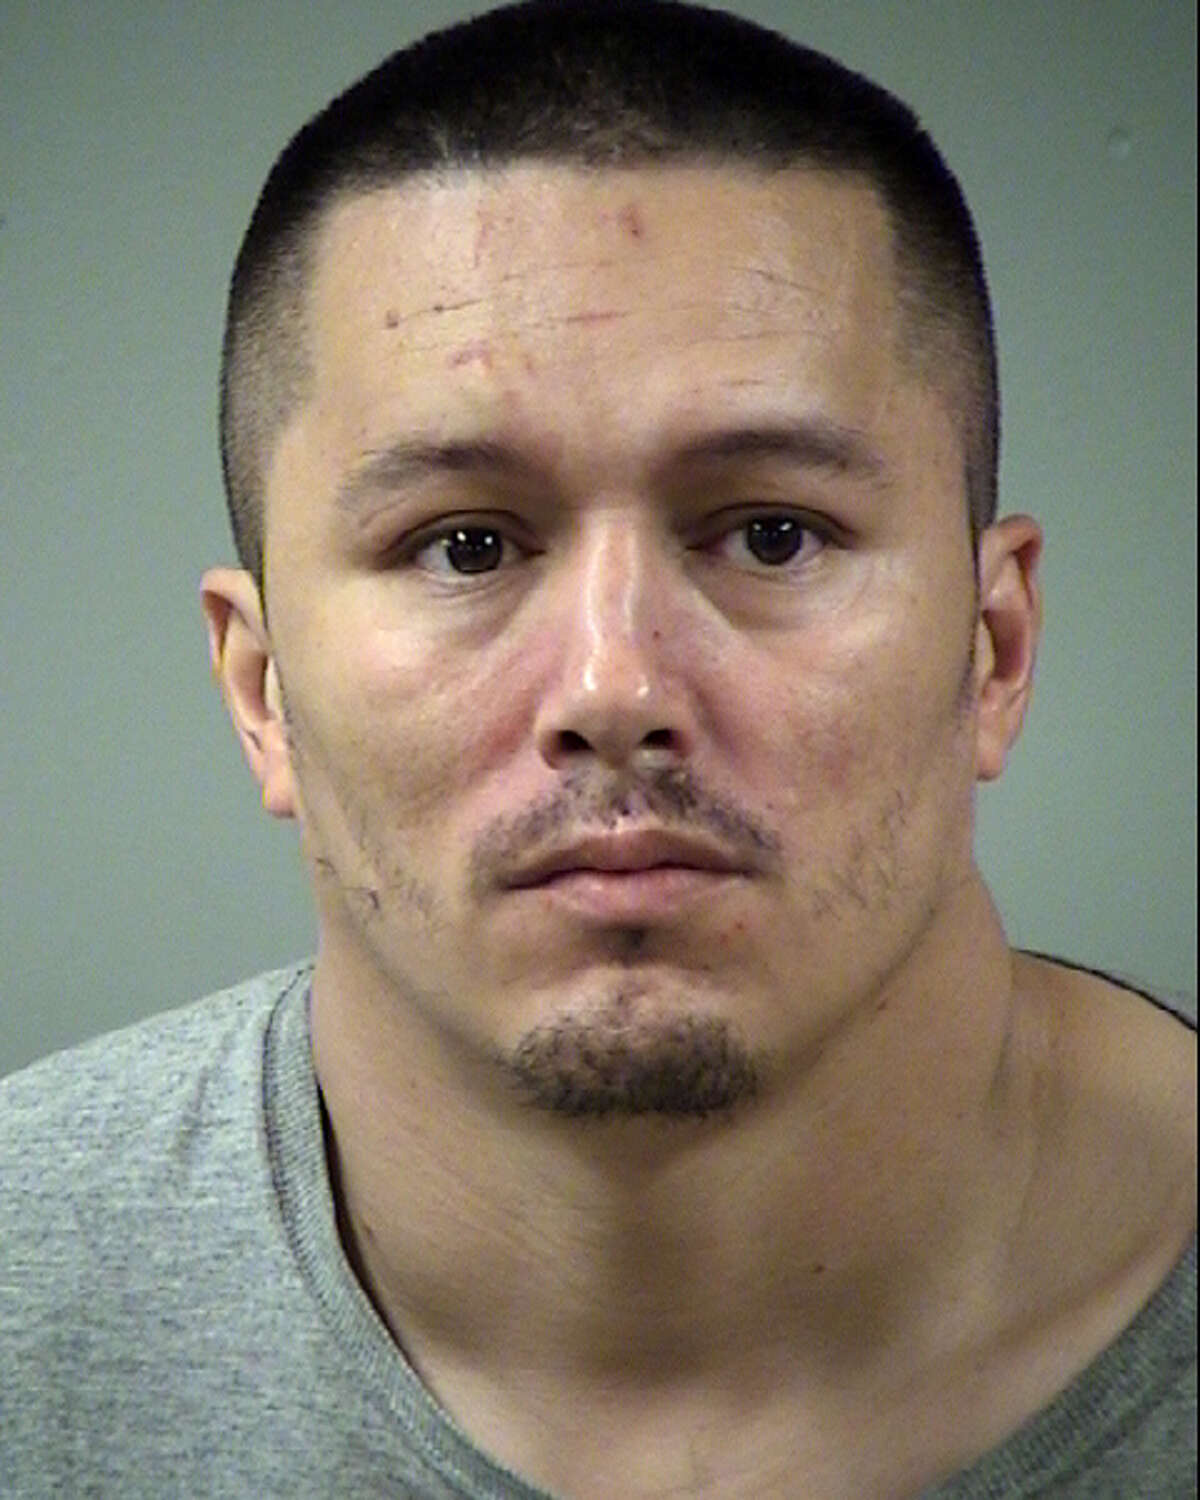 Christopher Vera is suspected of stealing from a Home Depot in October of 2015, according to an arrest warrant affidavit.